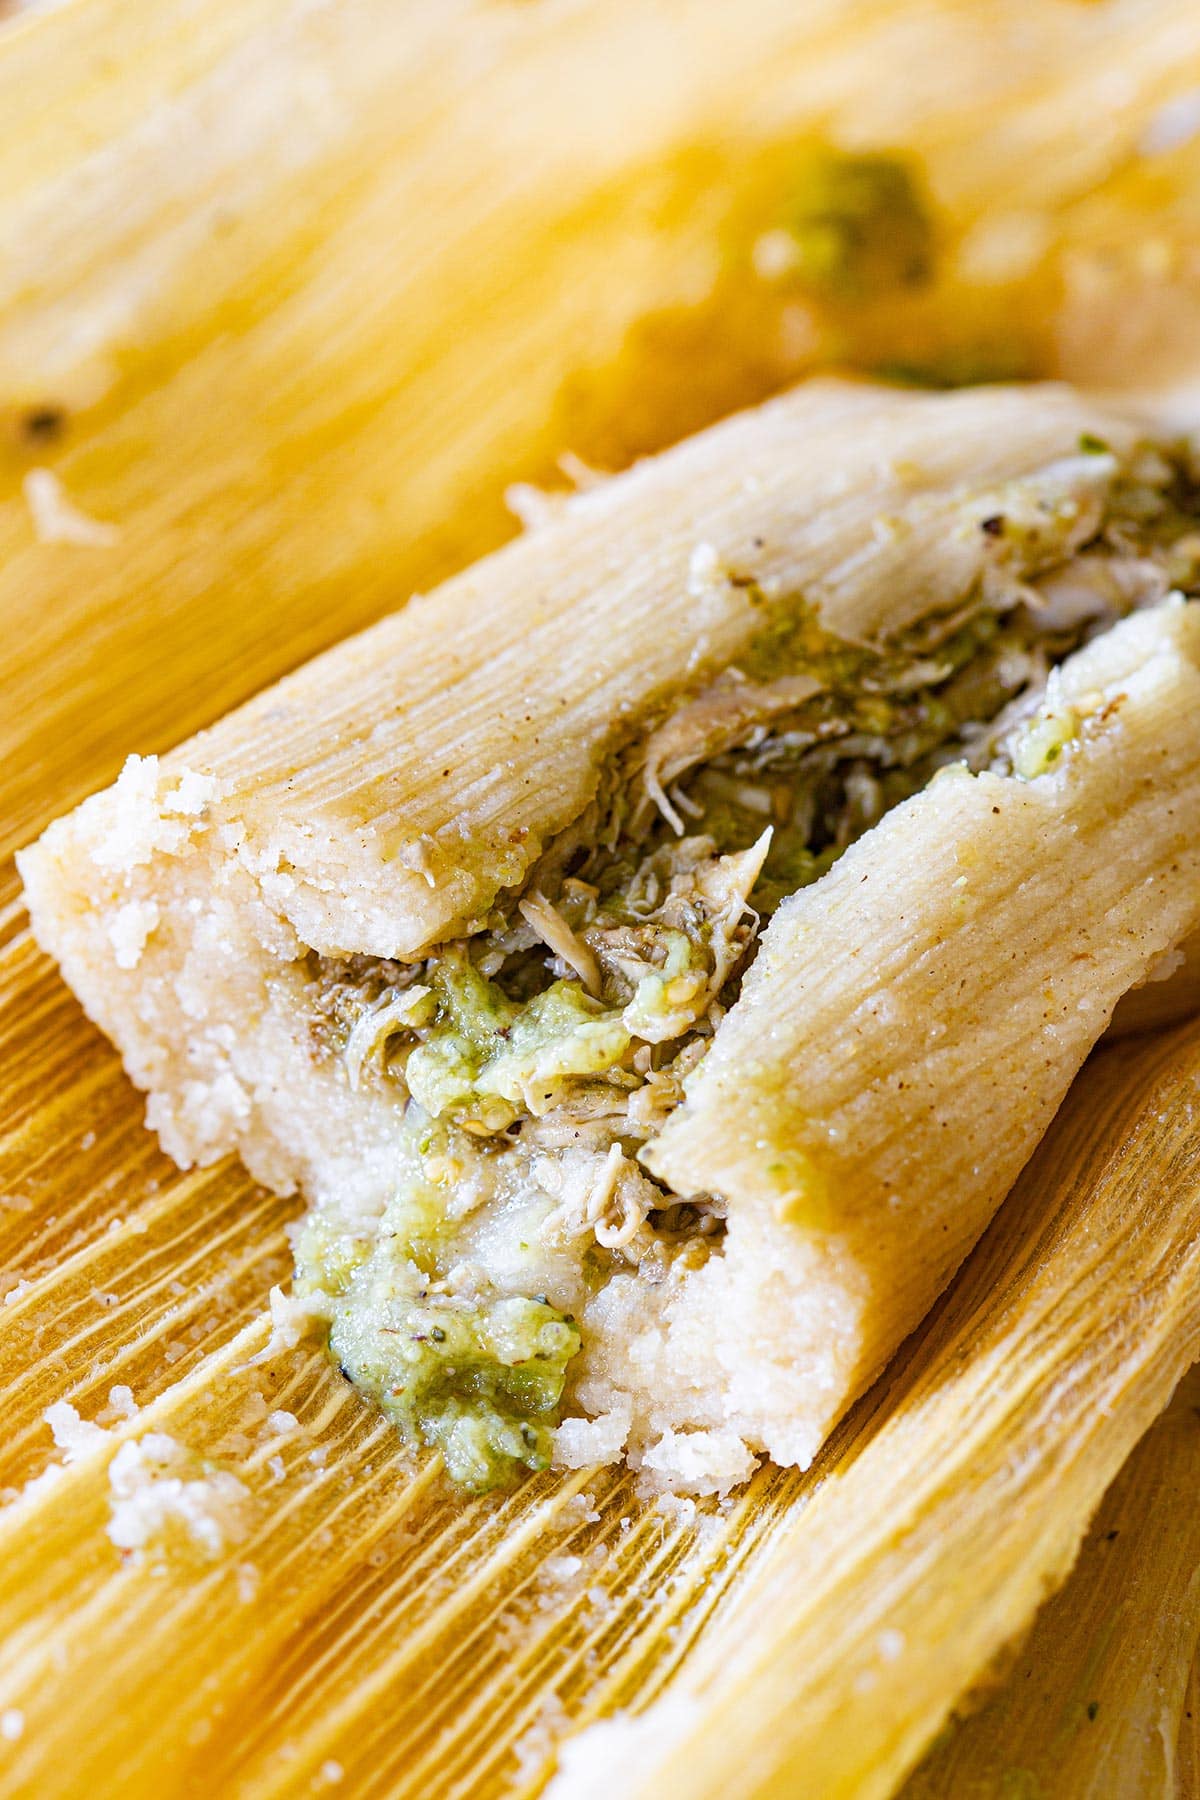 A chicken tamal verde opened to see the filling and texture in the inside.